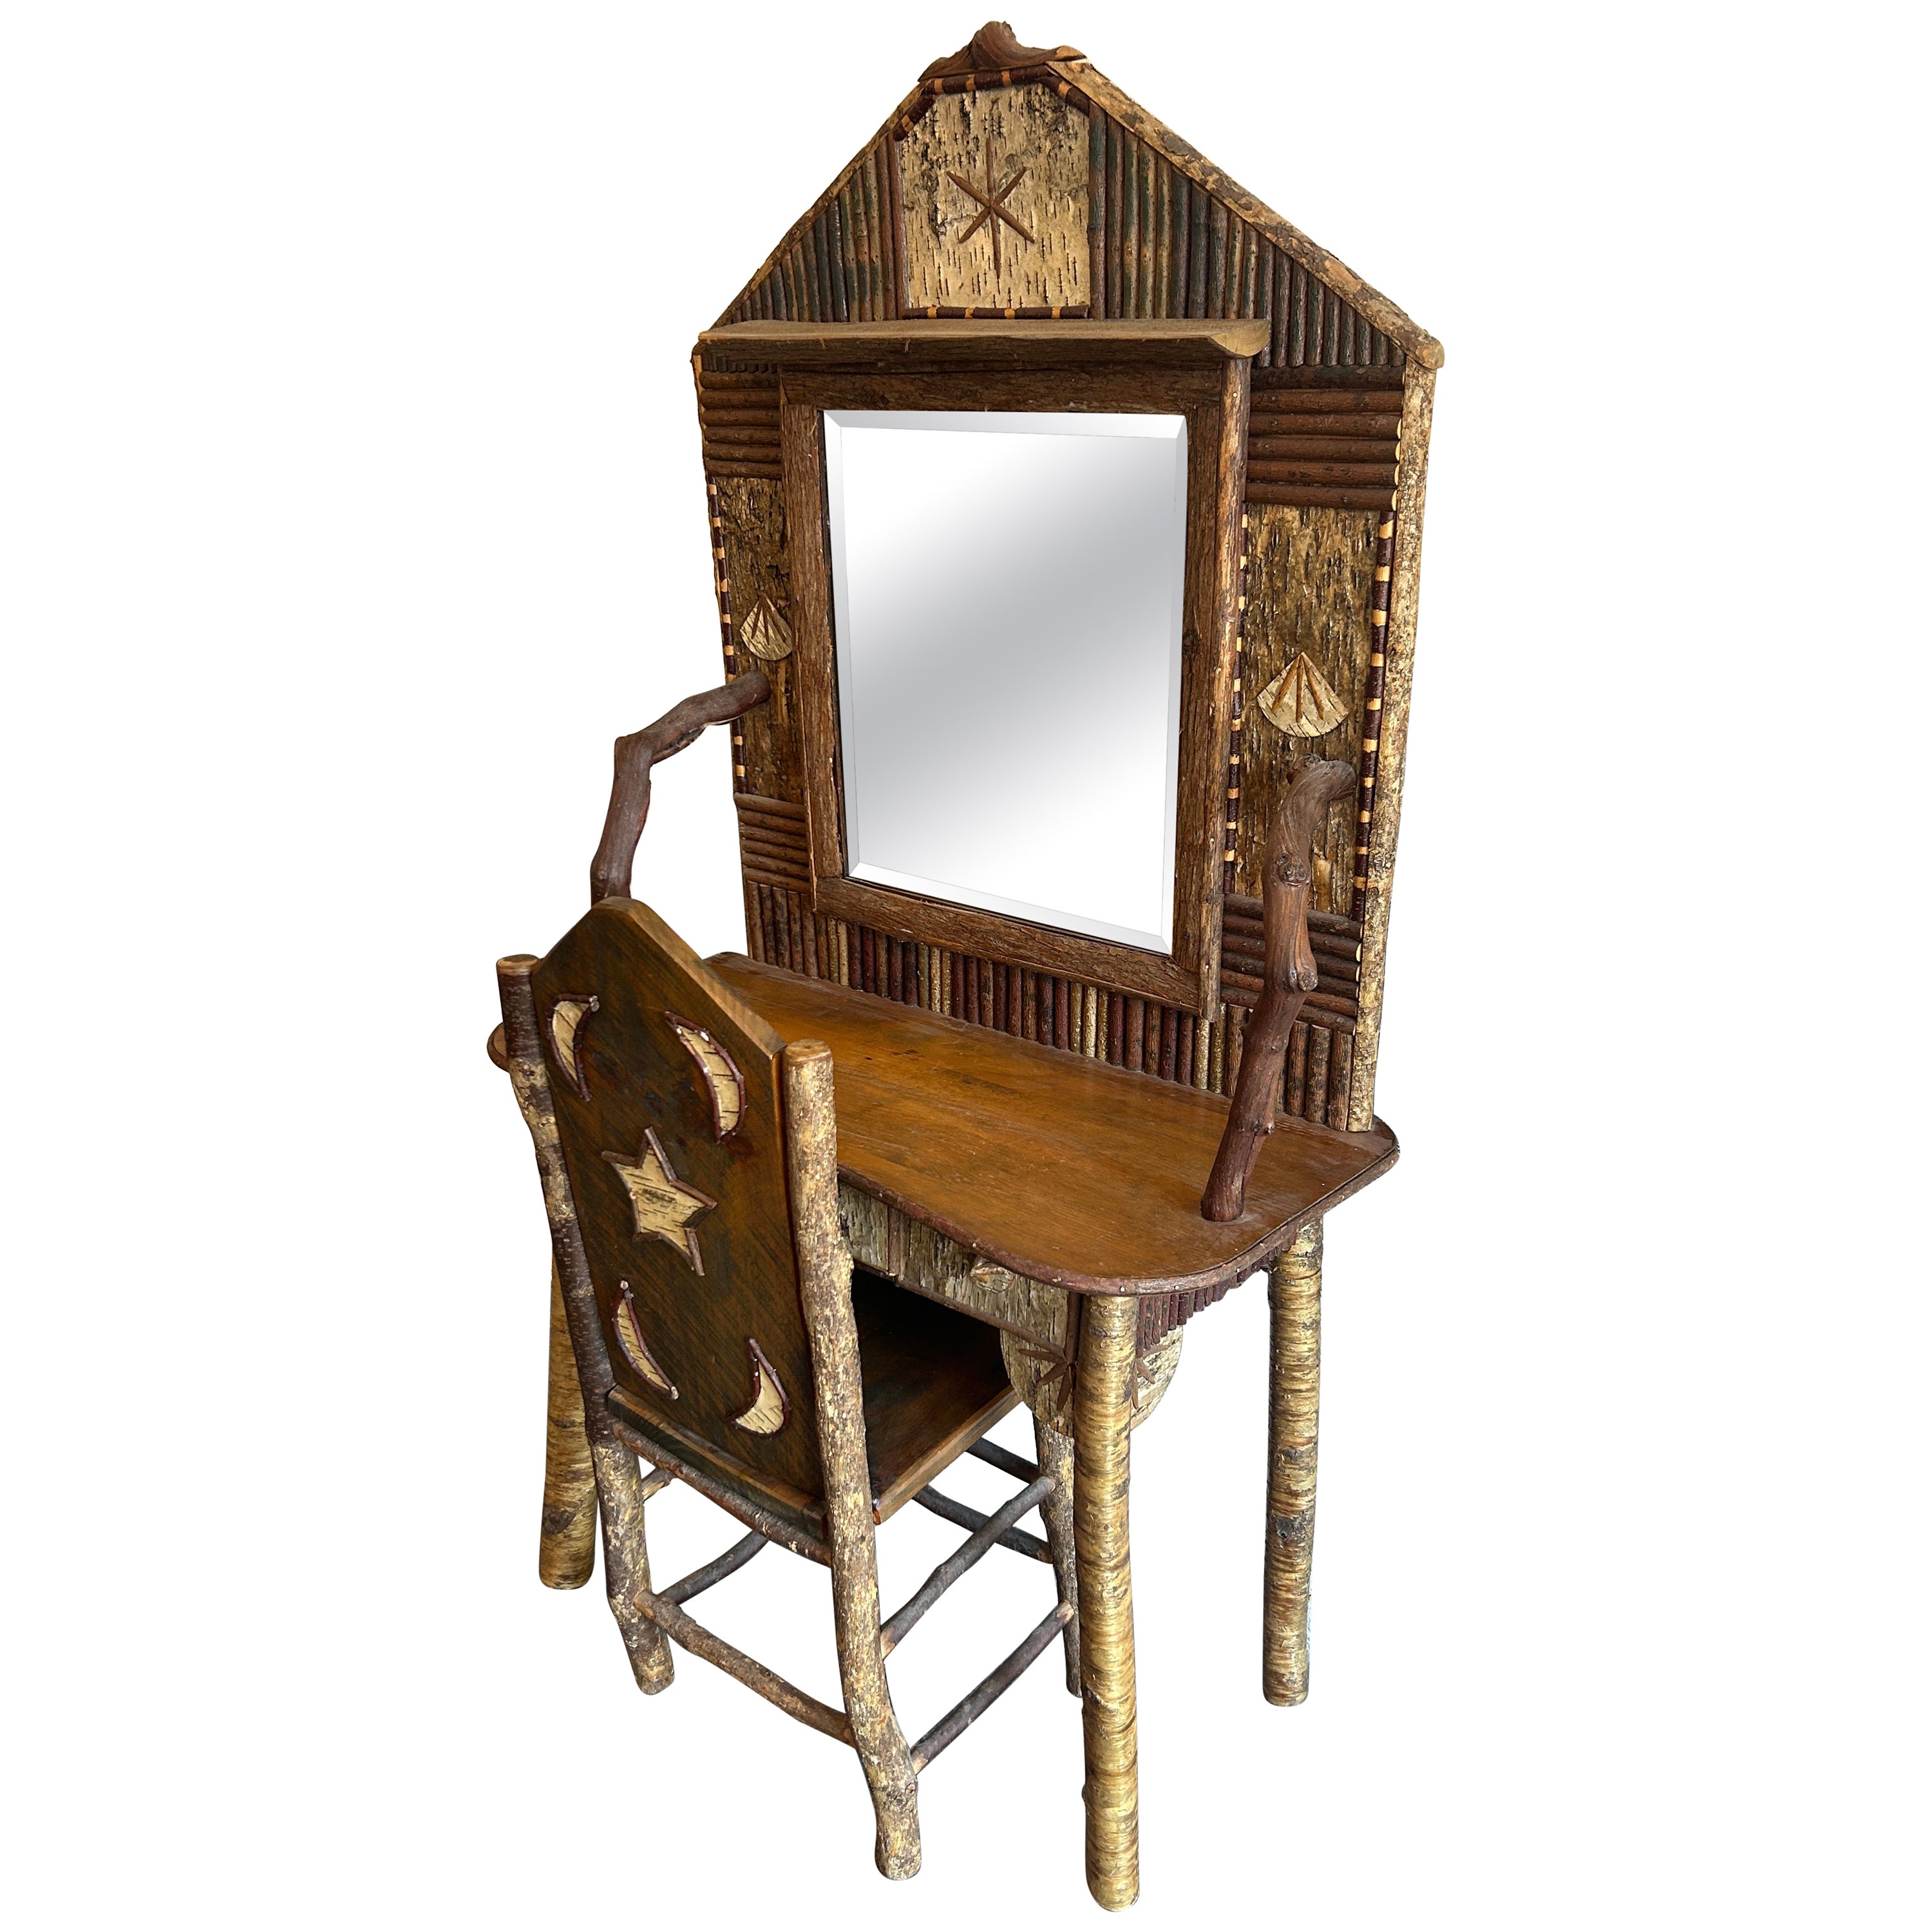 Whimsical rustic Adirondack child’s Vanity Mirror desk and chair studio craft For Sale